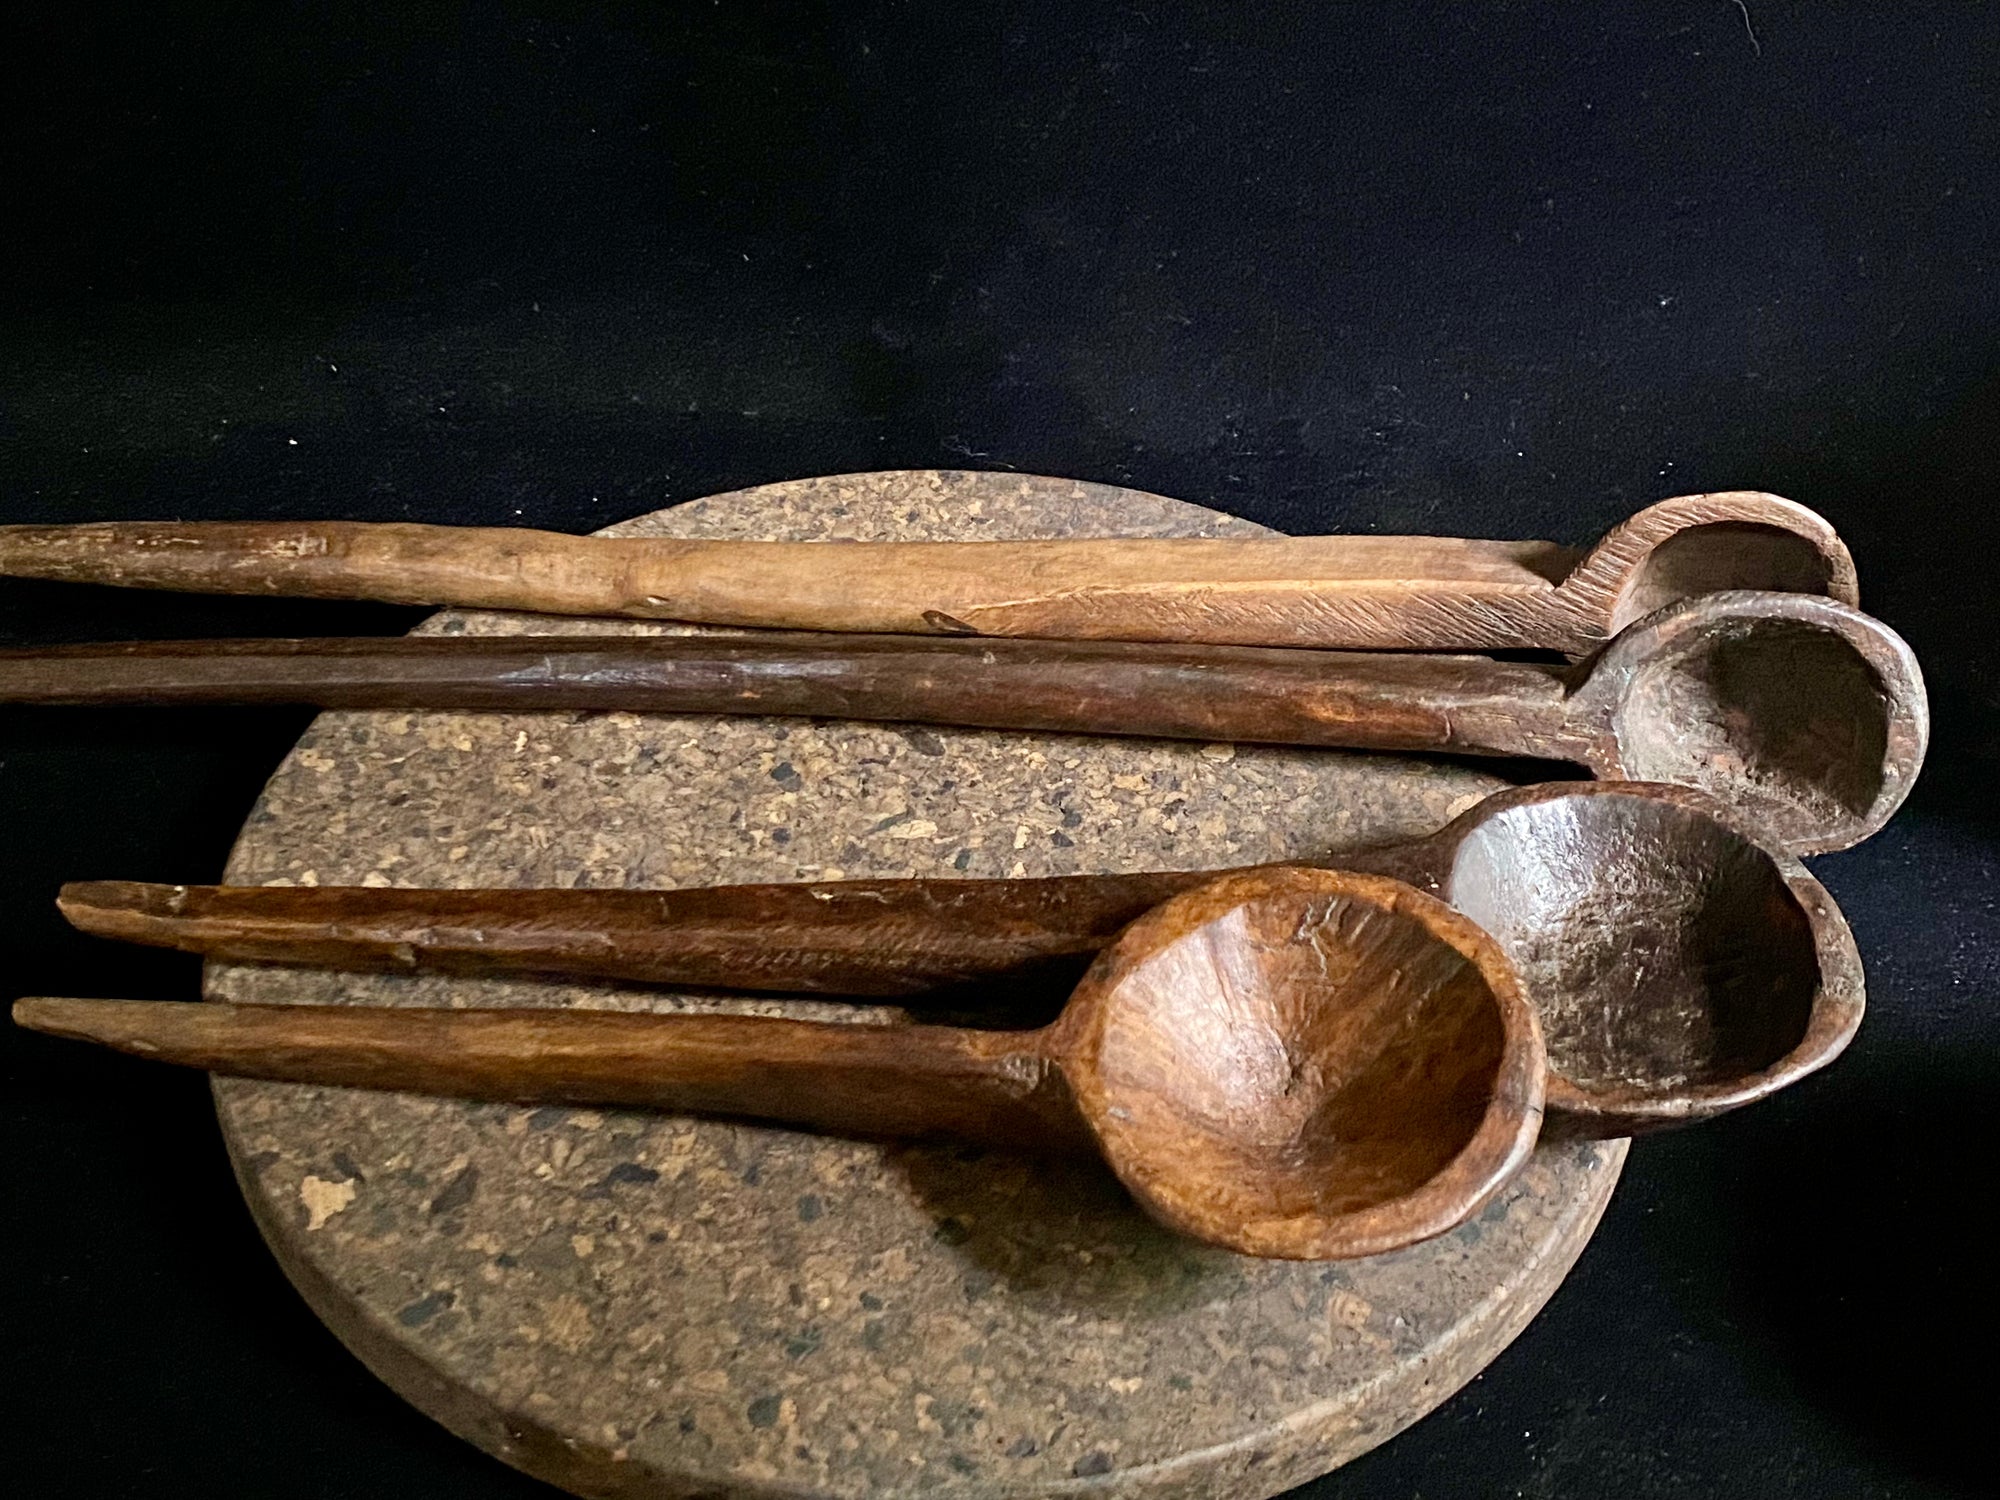 Vintage wood serving spoons or ladle, often used to serve dhal and biriyani dishes. Hand carved hardwood, mostly teak. From northern India. Our spoons have a lovely worn patina commensurate with their age. Each piece is hand carved, unique and artisan made. Measurements: length 35-40 cm, width of spoons 7-9 cm.